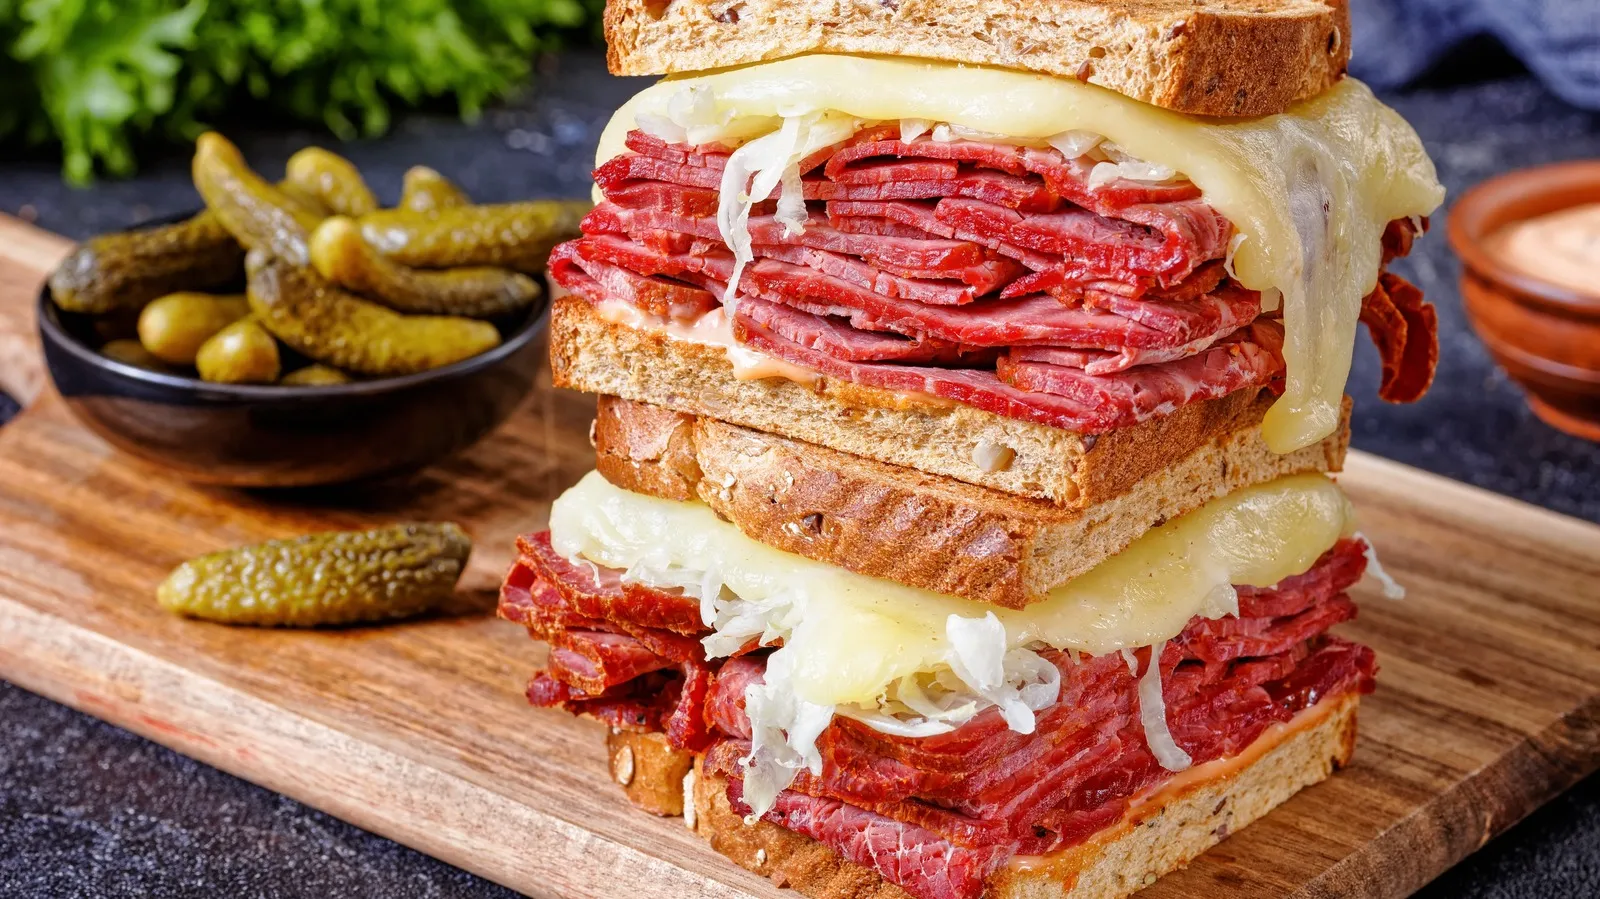 What Cheese Goes Best With Pastrami